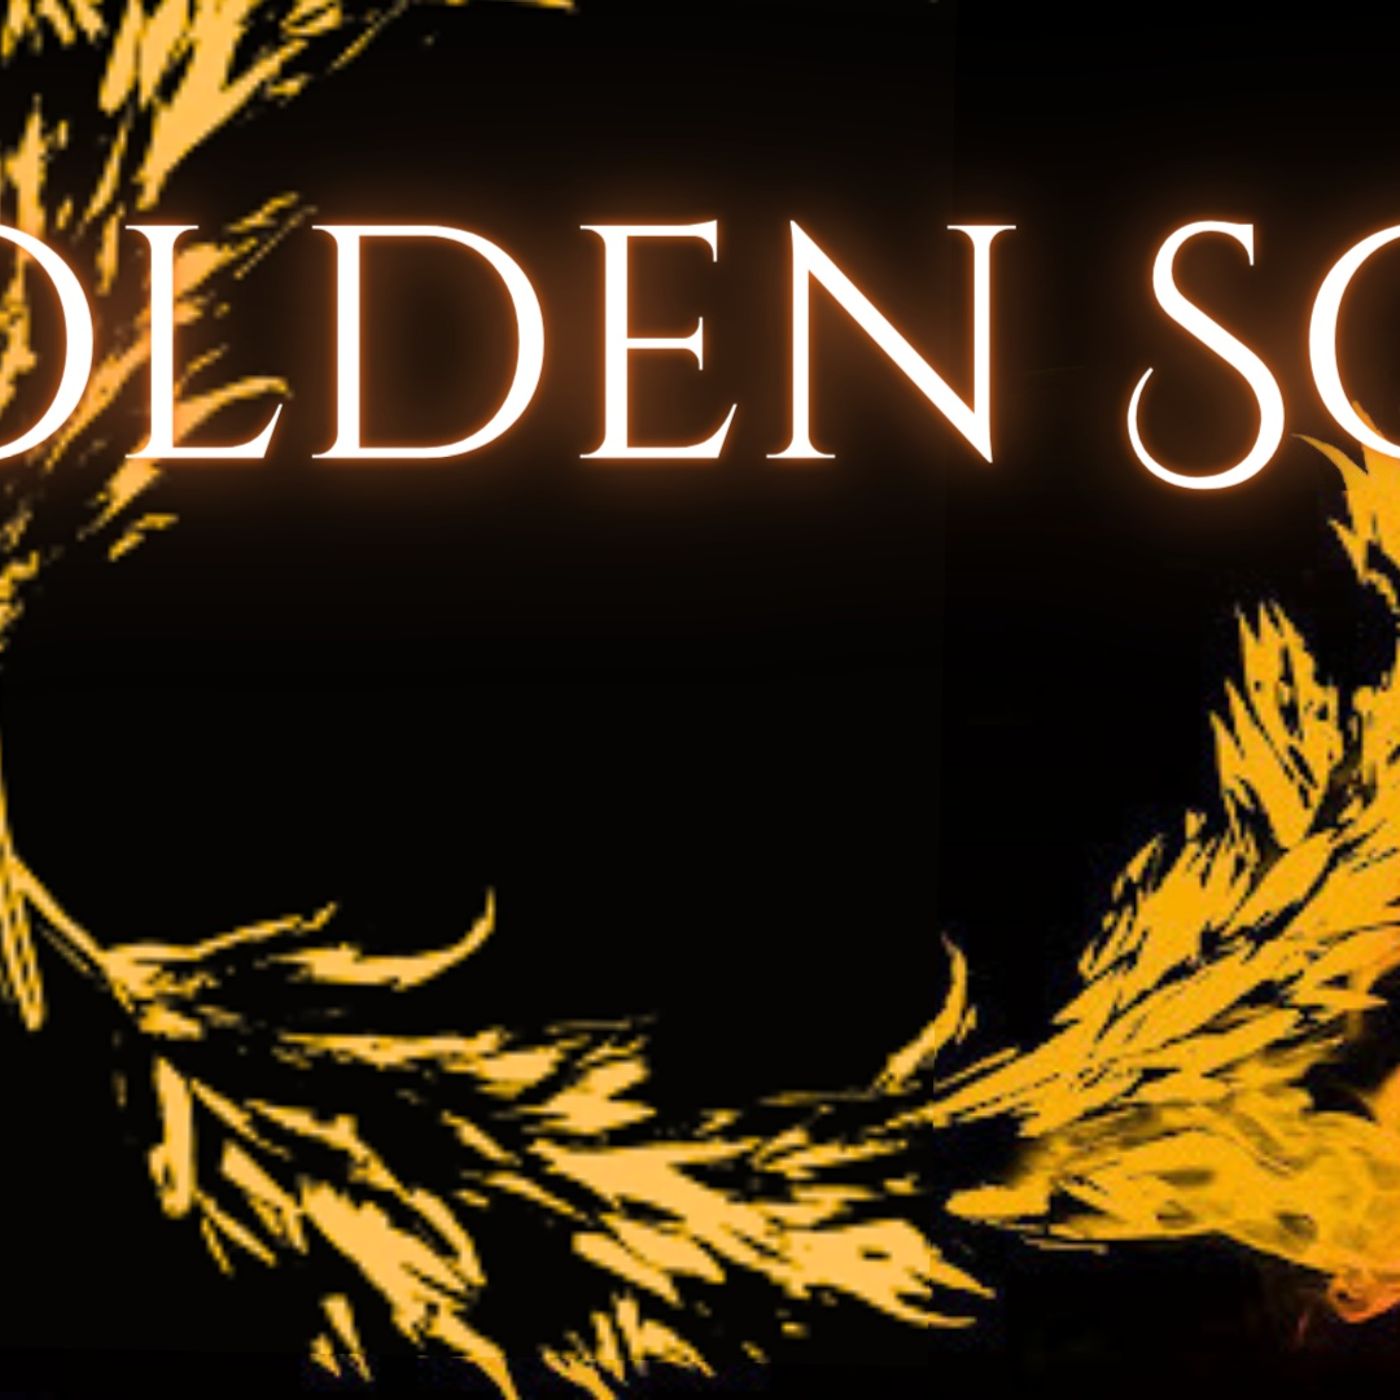 Golden Son, Chapters 16-18